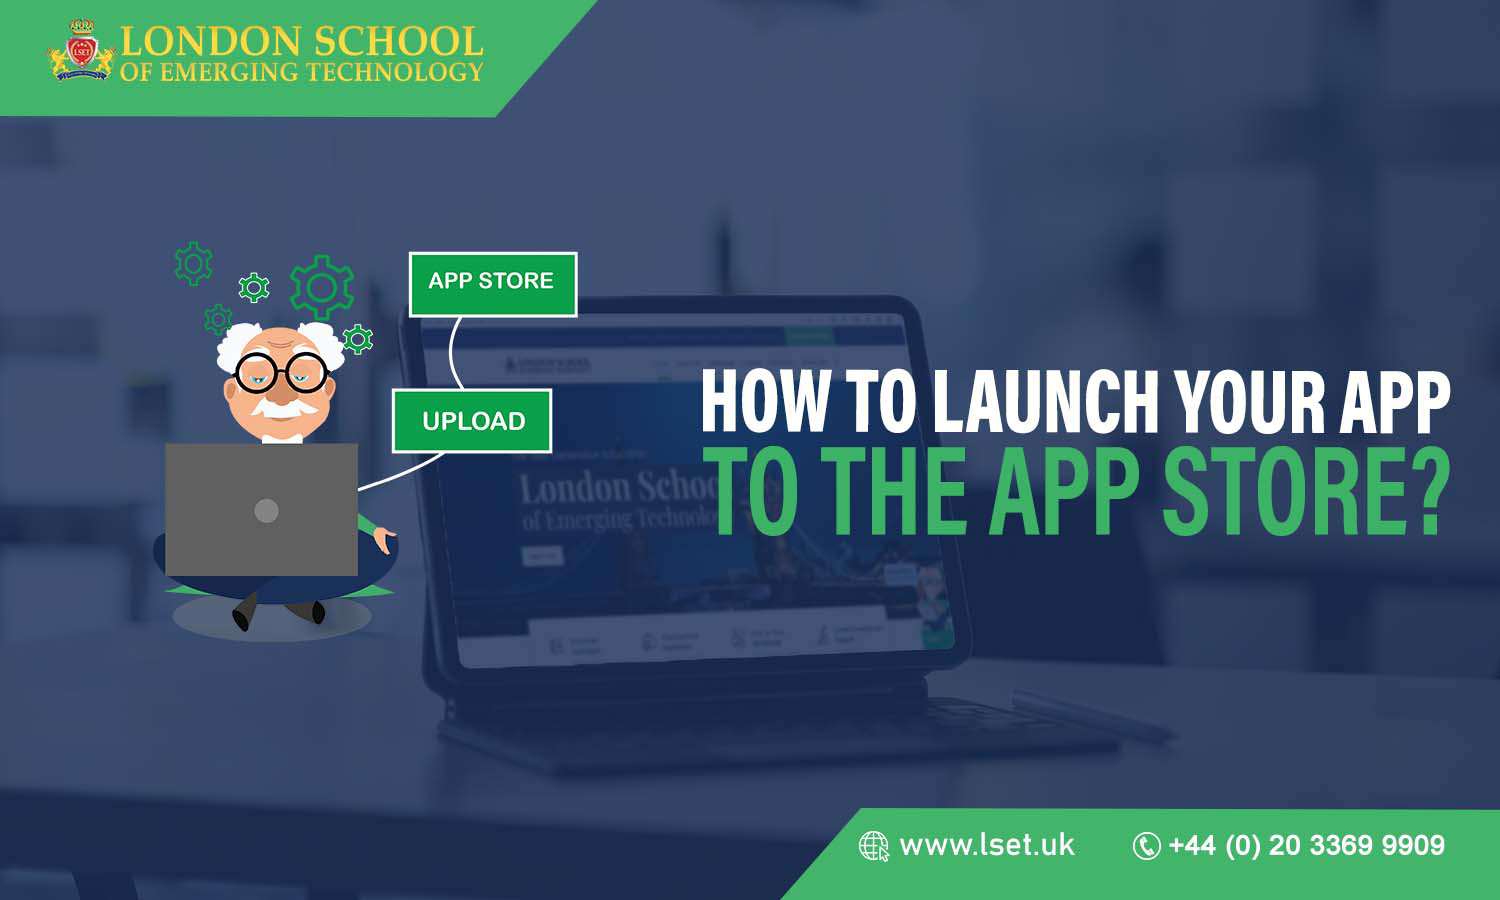 How to Launch Your App to the App Store